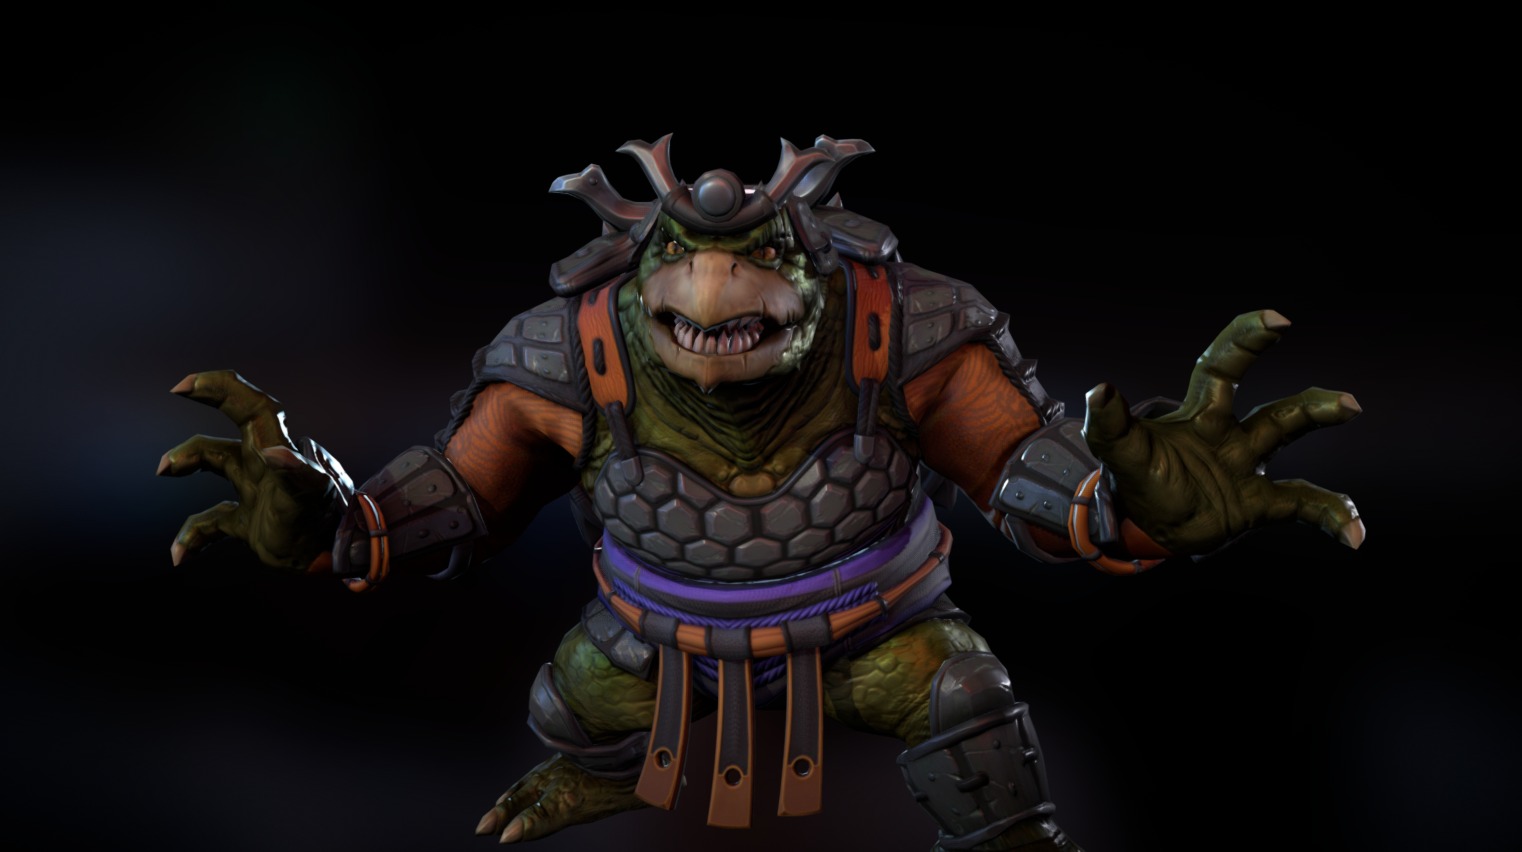 Recent Kuzenbo skin for SMITE Patch 4.8.  Super fun samurai theme this time.  Concept by John Bridges.  Thanks  verye much for looking - Honor Bound Kuzenbo - 3D model by Jmiles 3d model